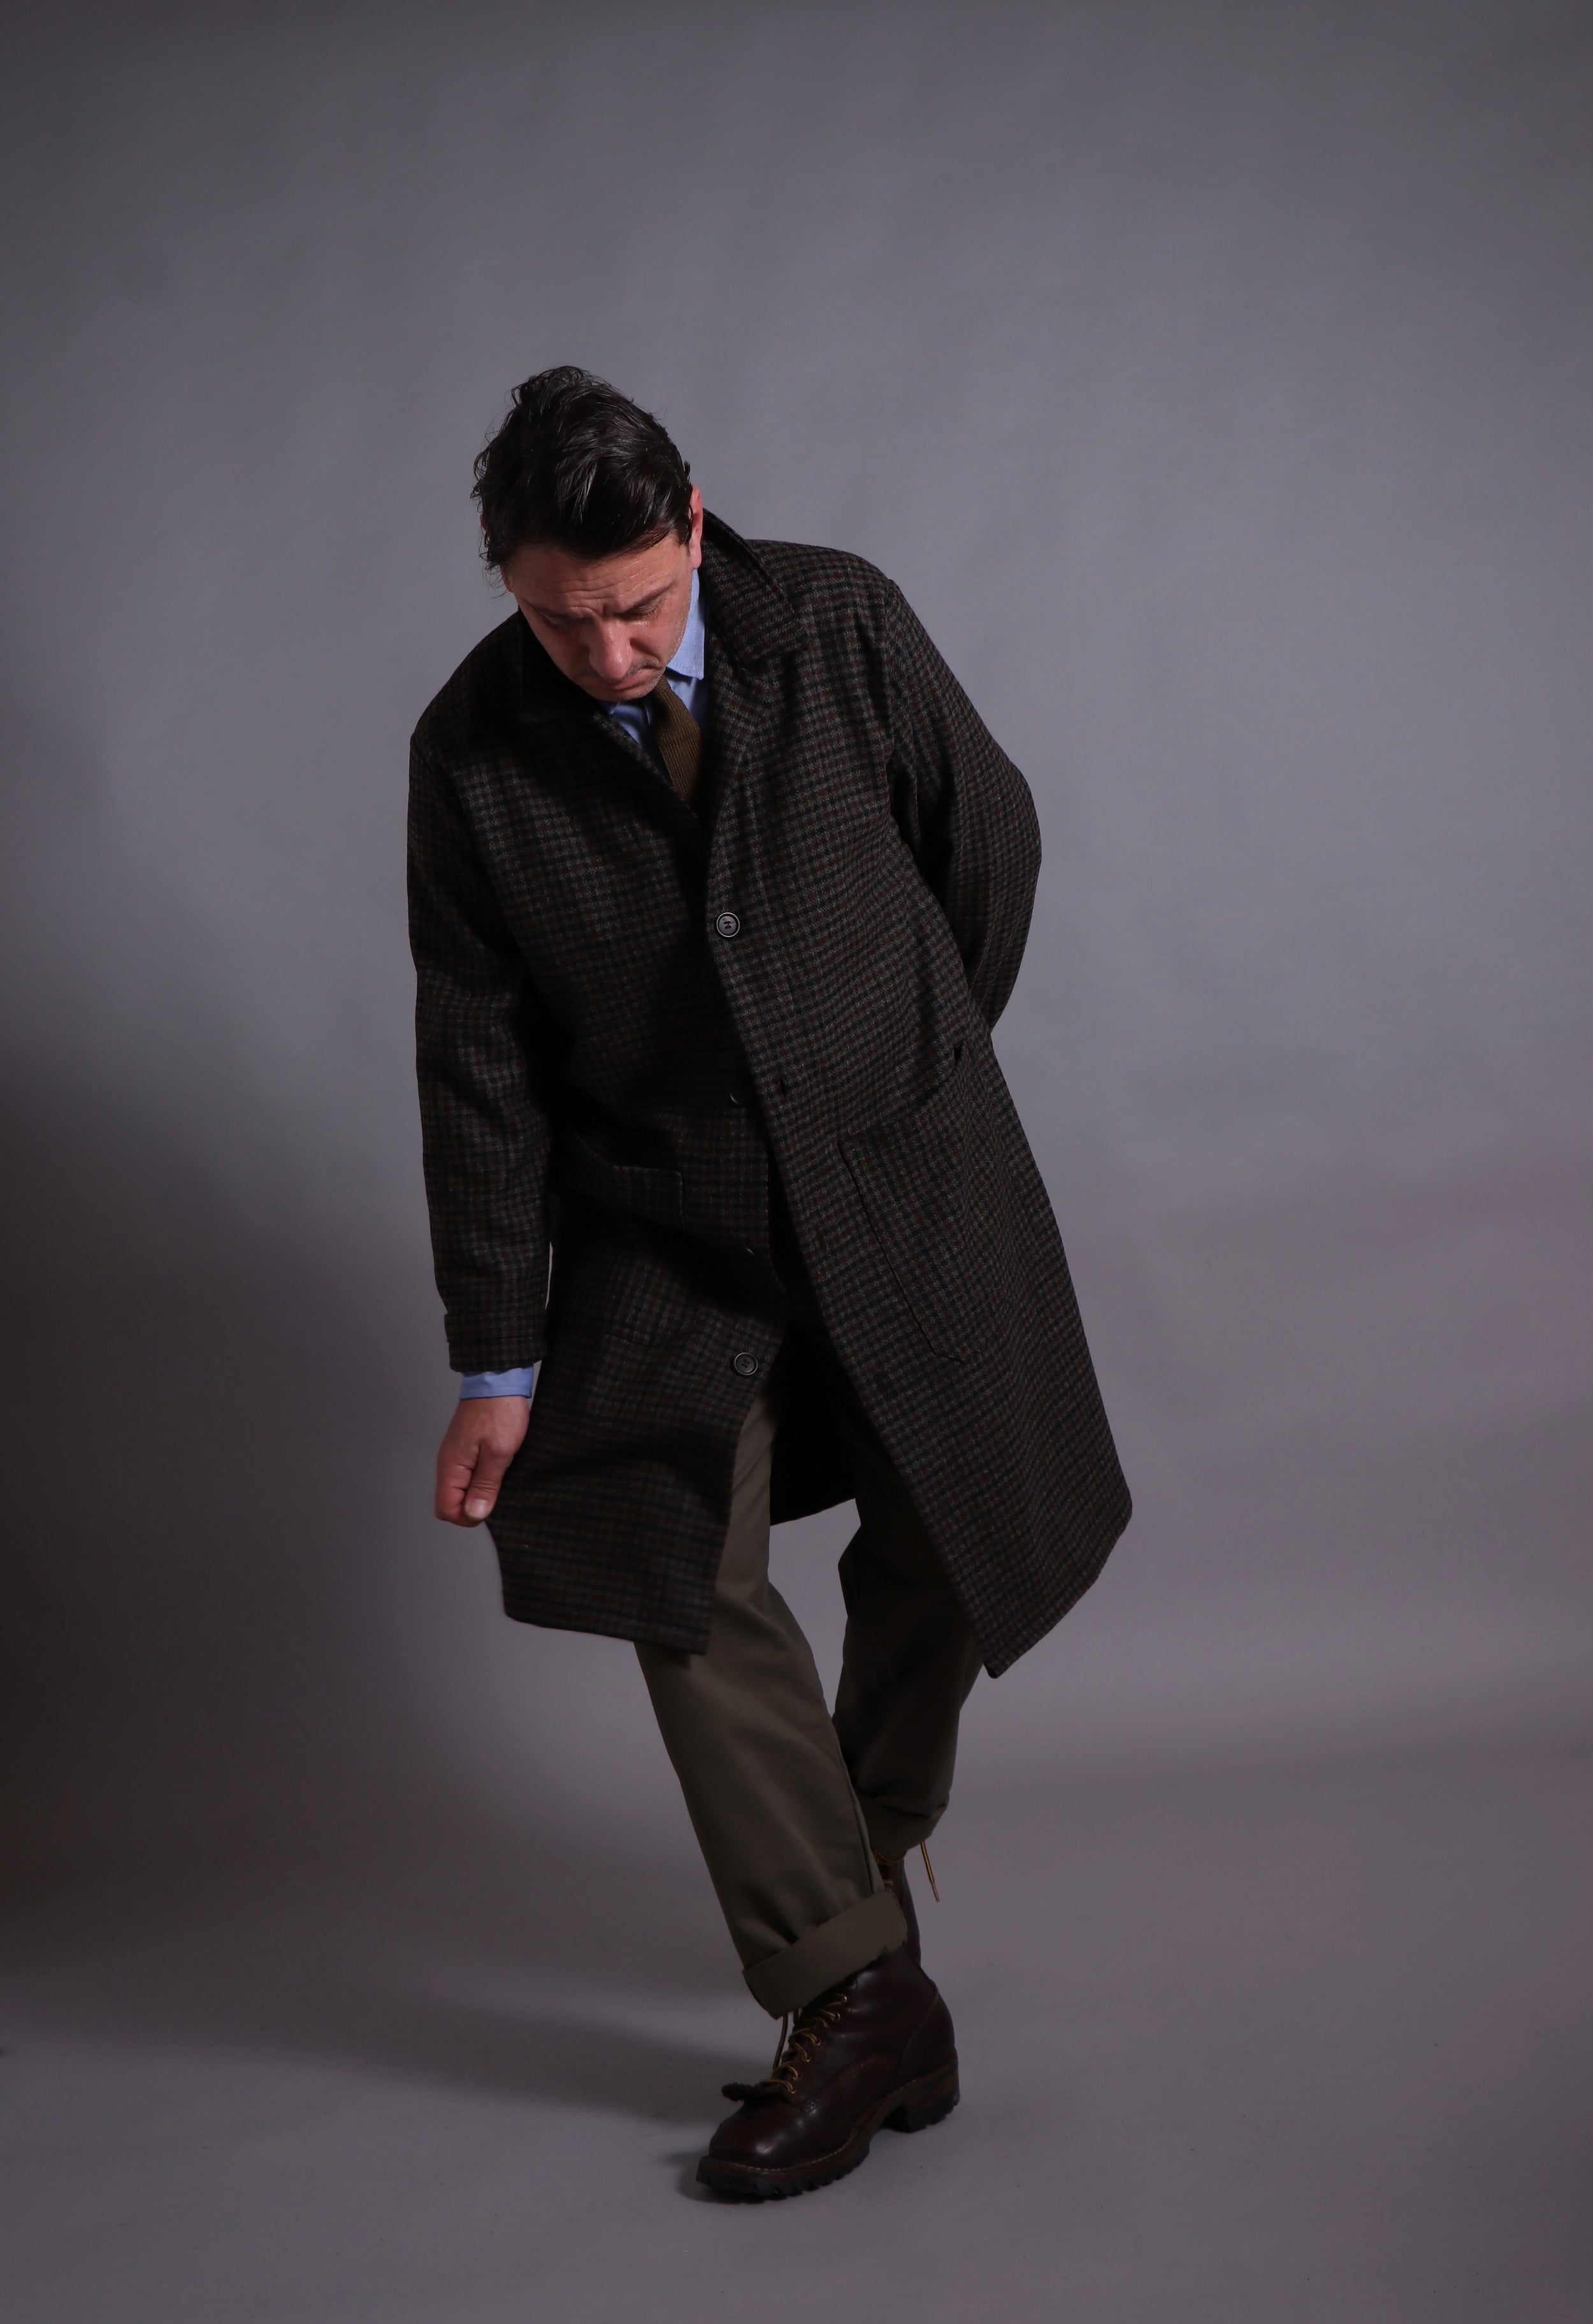 Enzo wears Carrier Company Wool Coat, with Chambray Poplin Shirt and Olive Work Trousers